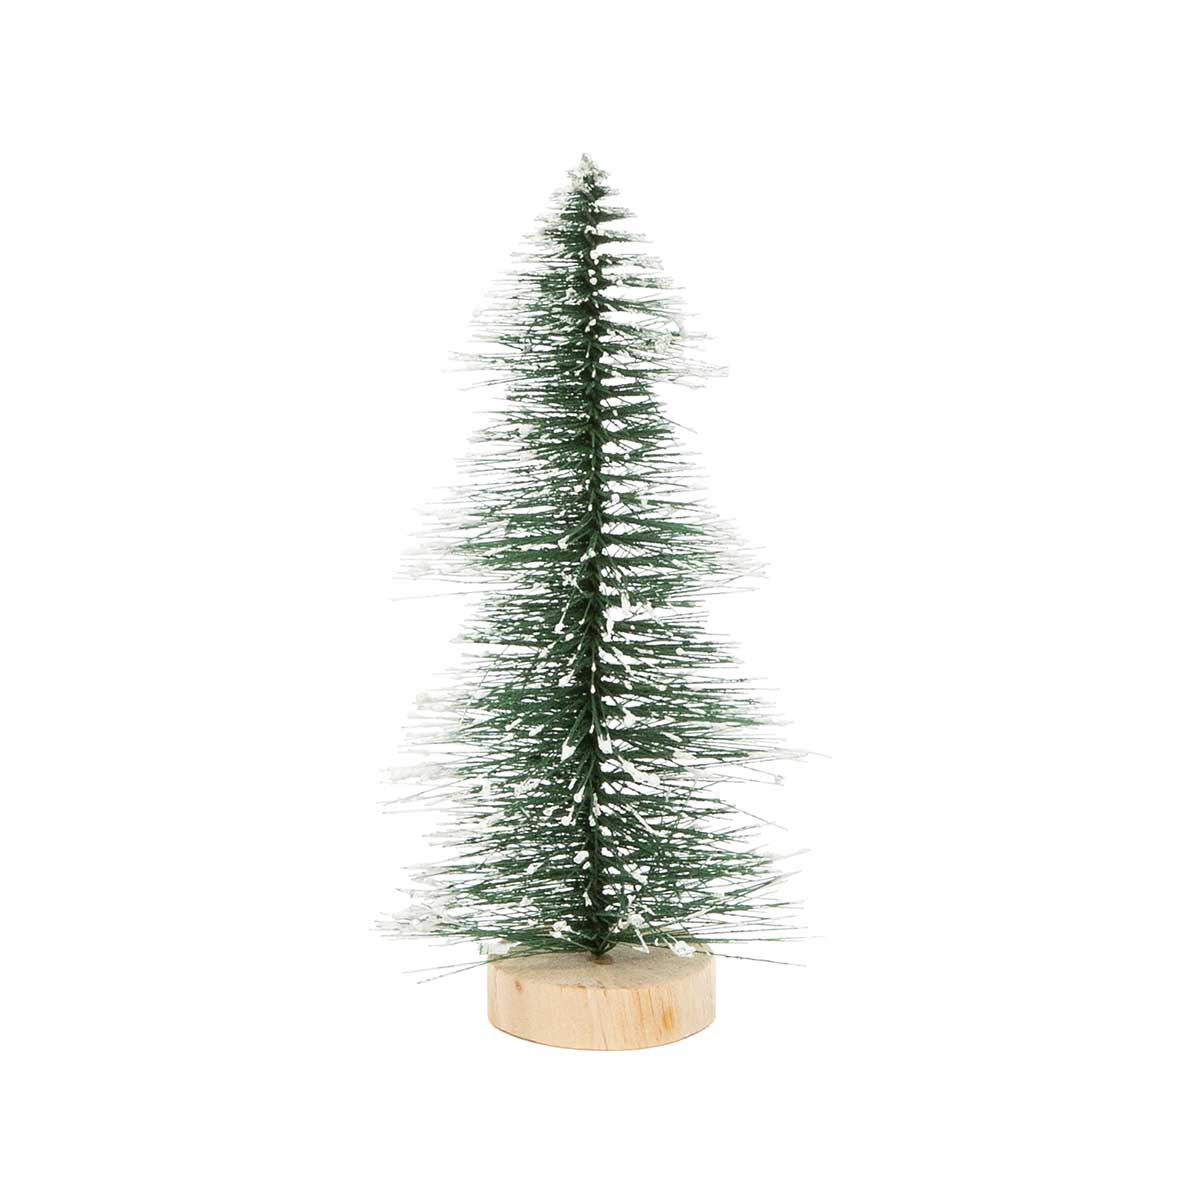 ALPINE BRISTLE TREE DARK GREEN WITH SNOW AND WOOD BASE SMALL